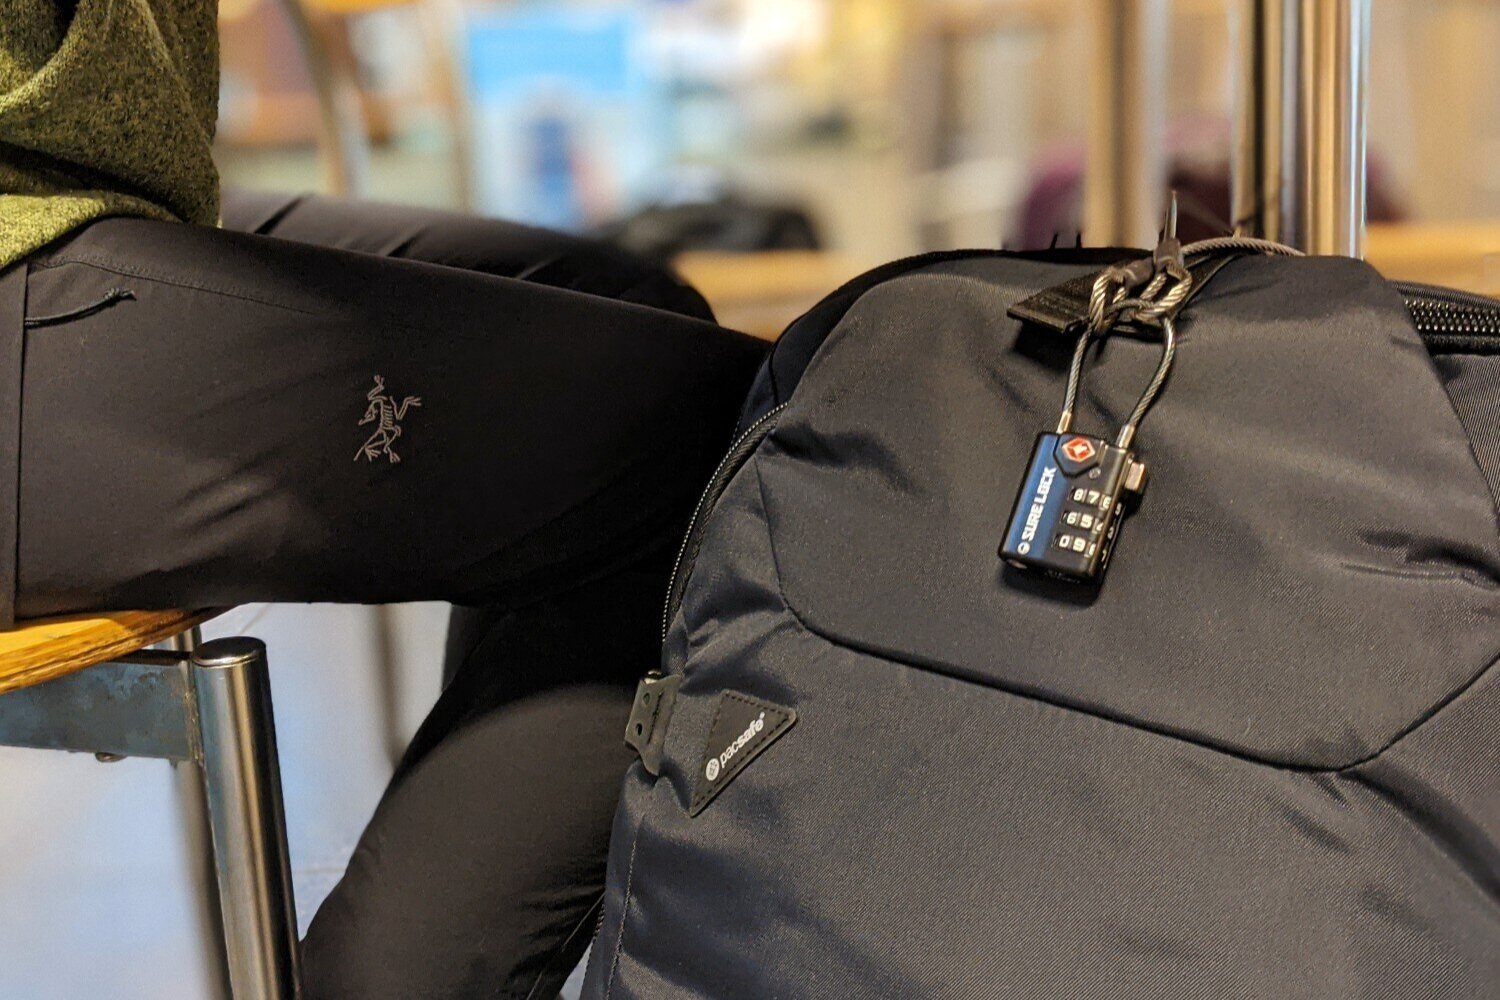 The Pacsafe Venturesafe EXP45 comes with a cable lock that can be paired with a TSA Approved Luggage Lock to secure your bag to a table or chair.